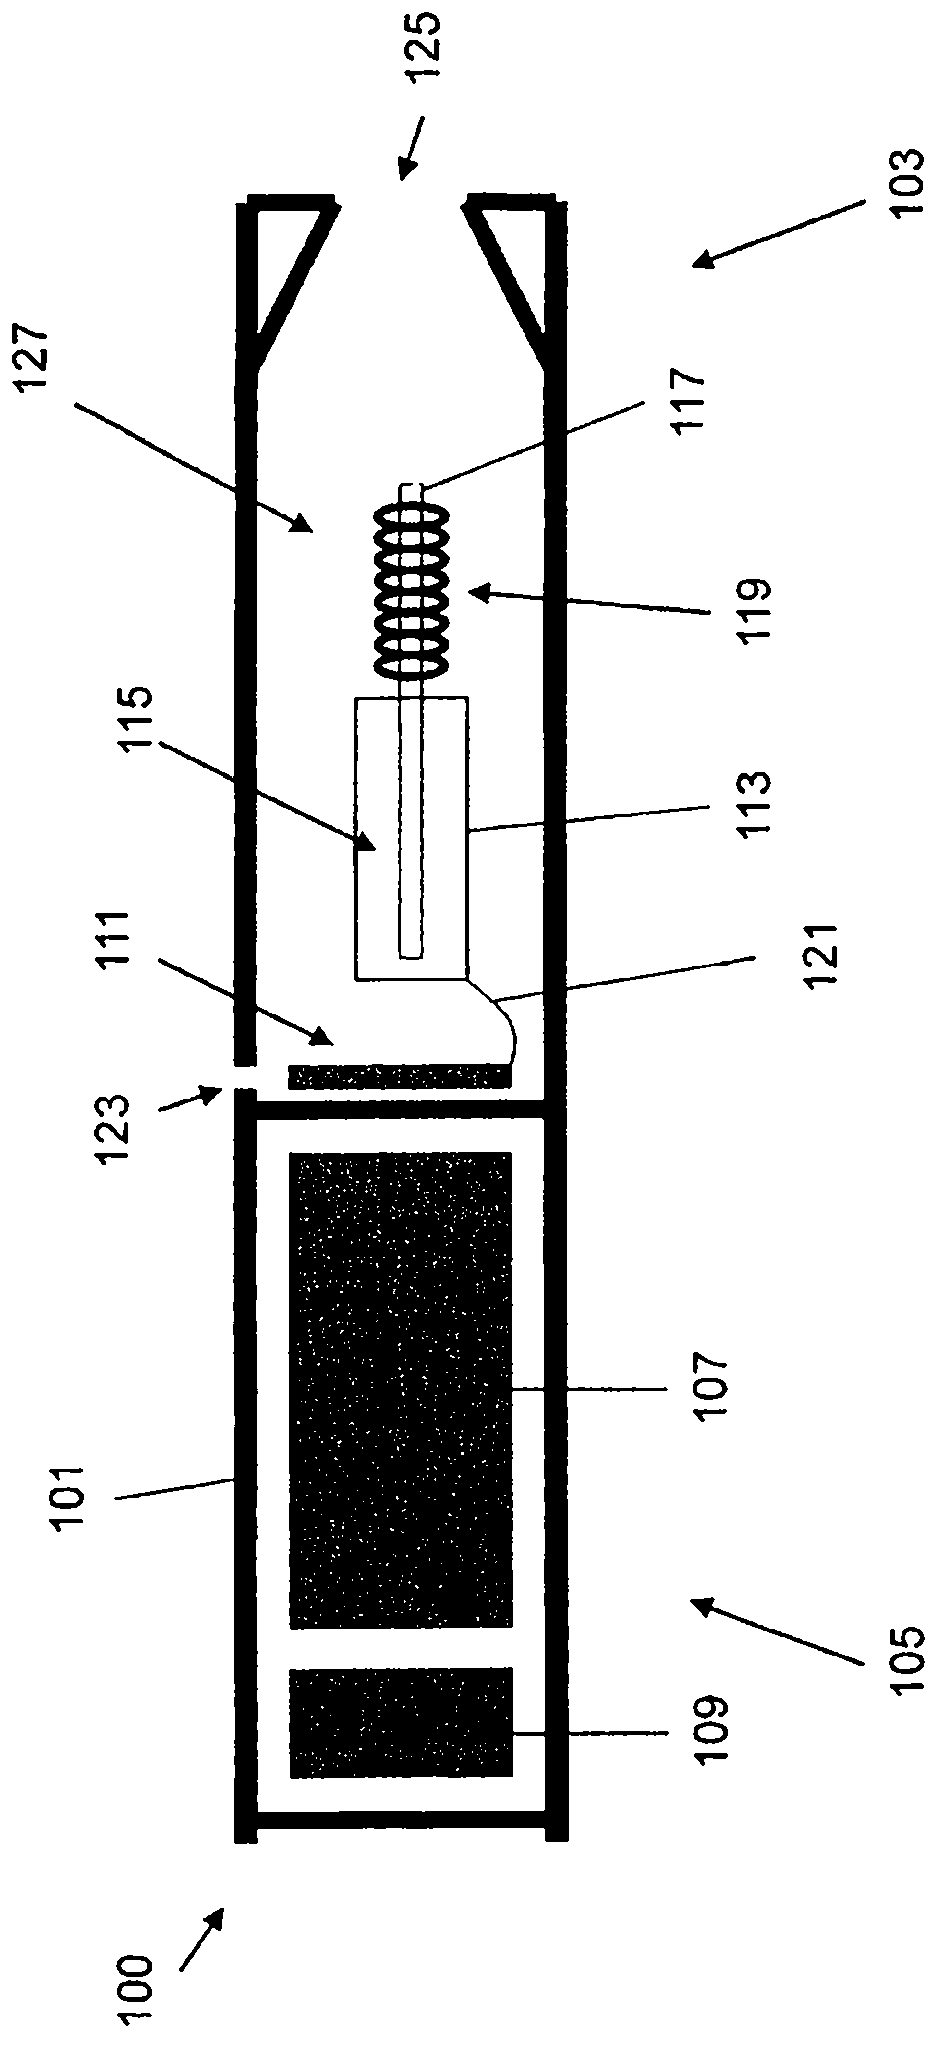 An aerosol generating system having means for handling consumption of a liquid substrate